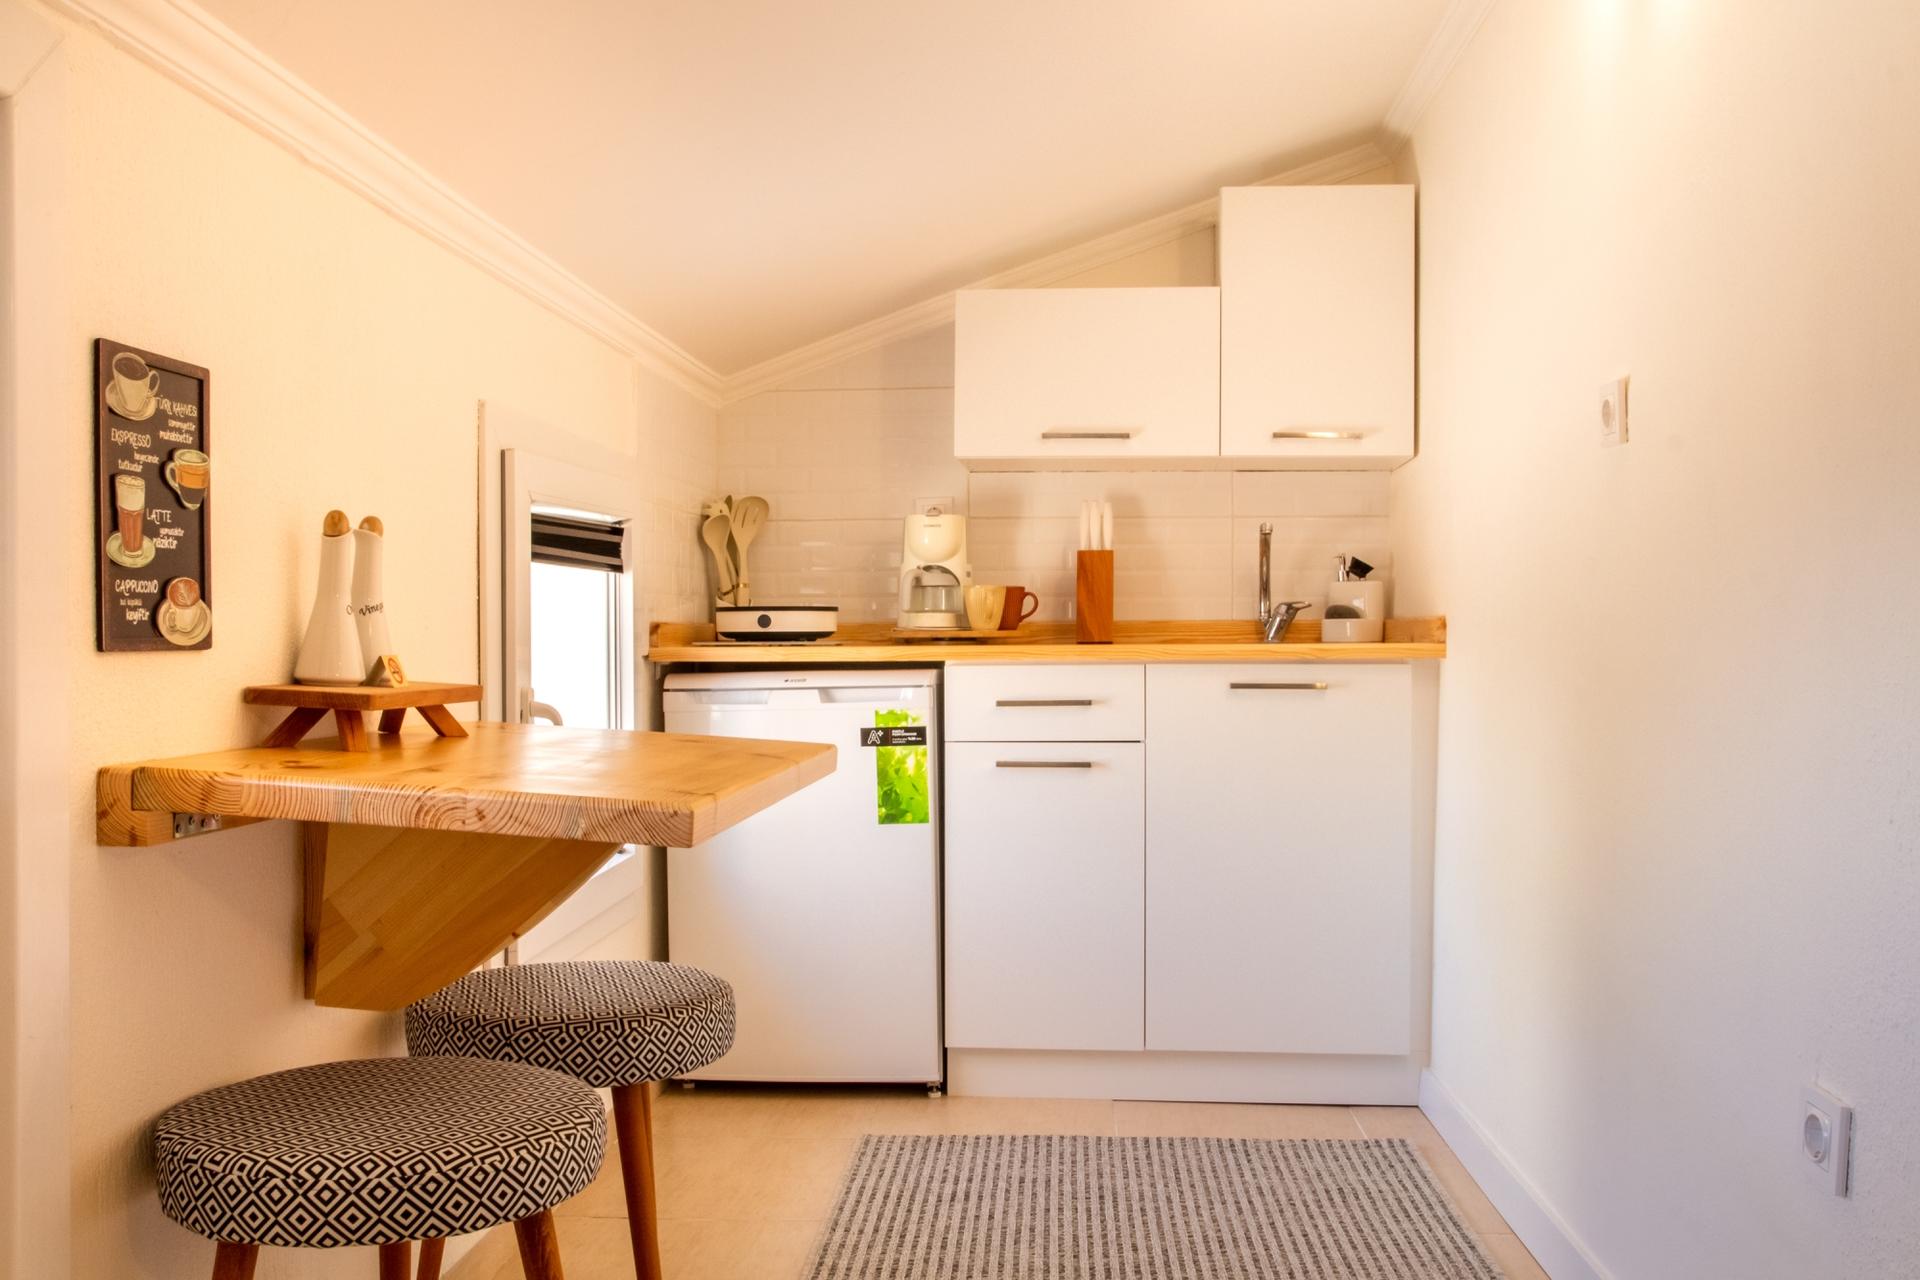 Our small but functional kitchen features modern appliances.